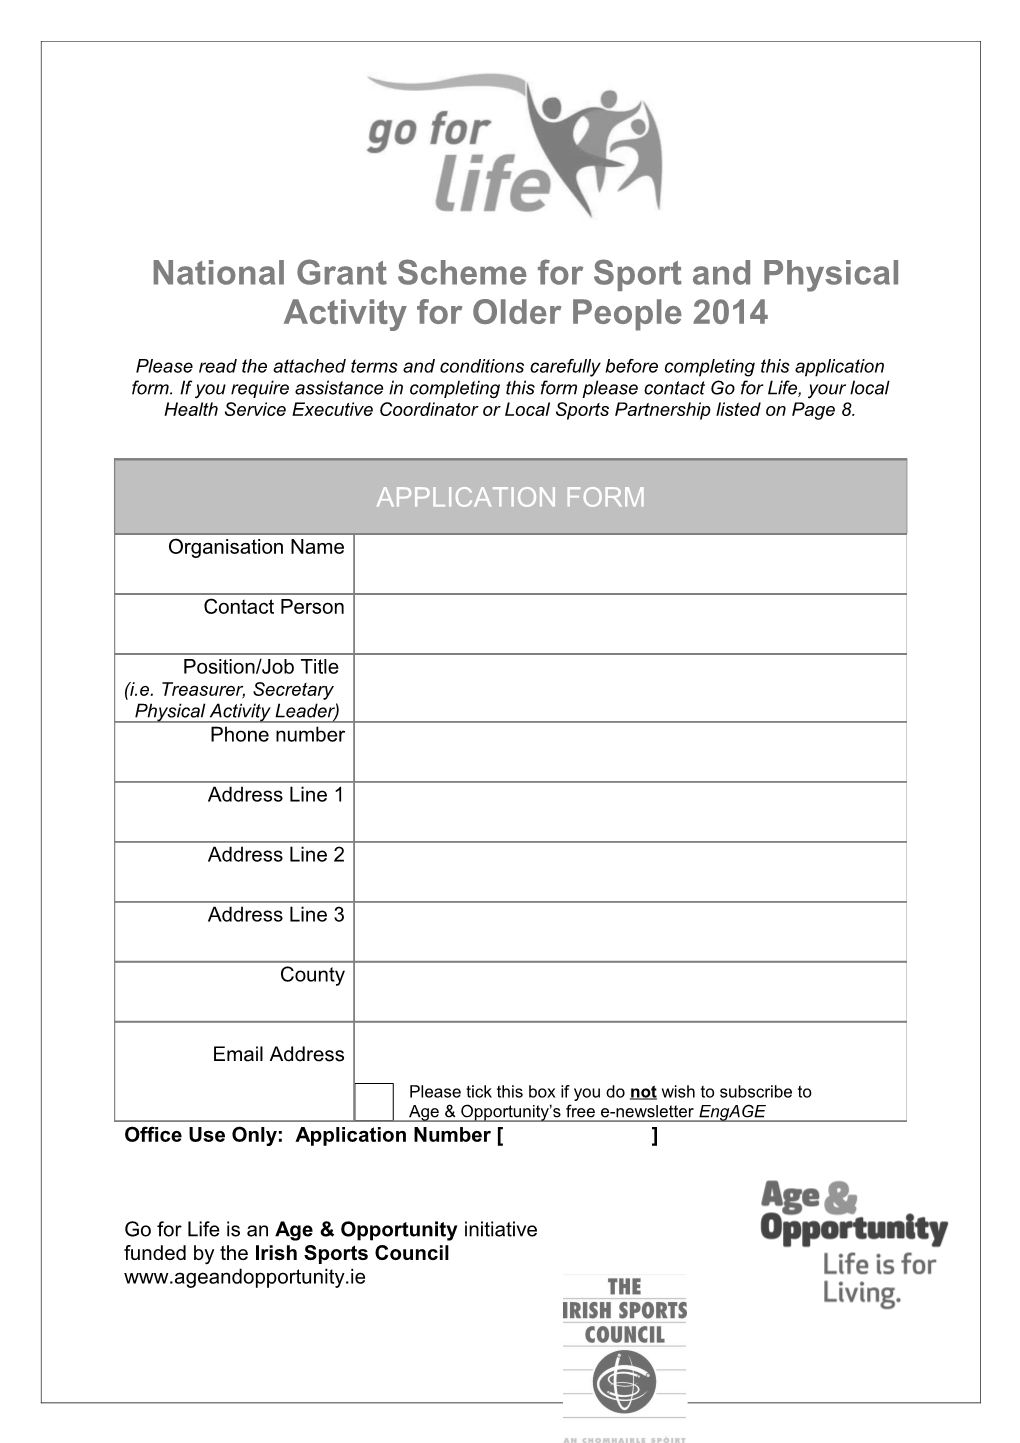 The National Grant Scheme